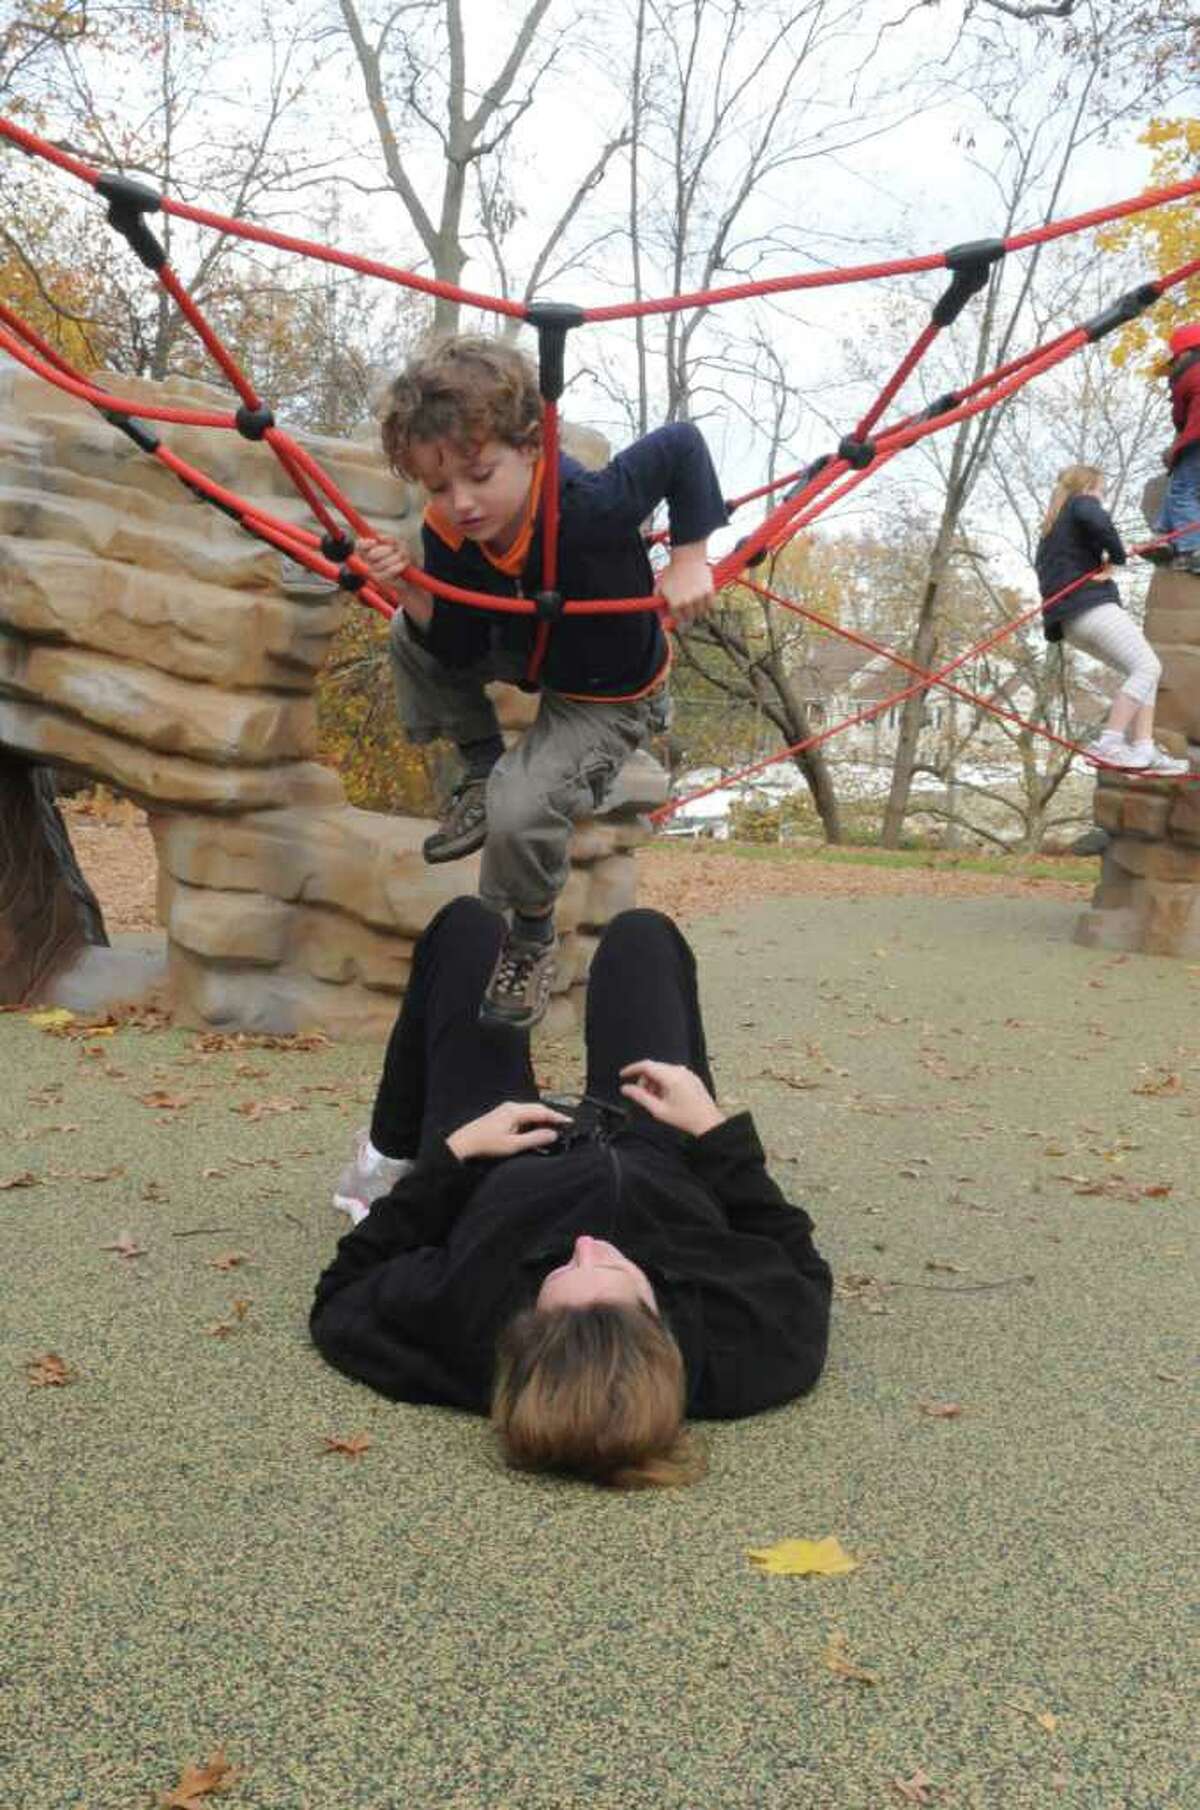 Katie Bistrian, of Greenwich, watches her son Bass, 4, play at the "Rocks and Ropes" playground. The Junior League of Greenwich hosted a ribbon-cutting ceremony for the Bruce Park Boundless playground's "Rocks and Ropes" Sunday, Nov. 13, 2011.